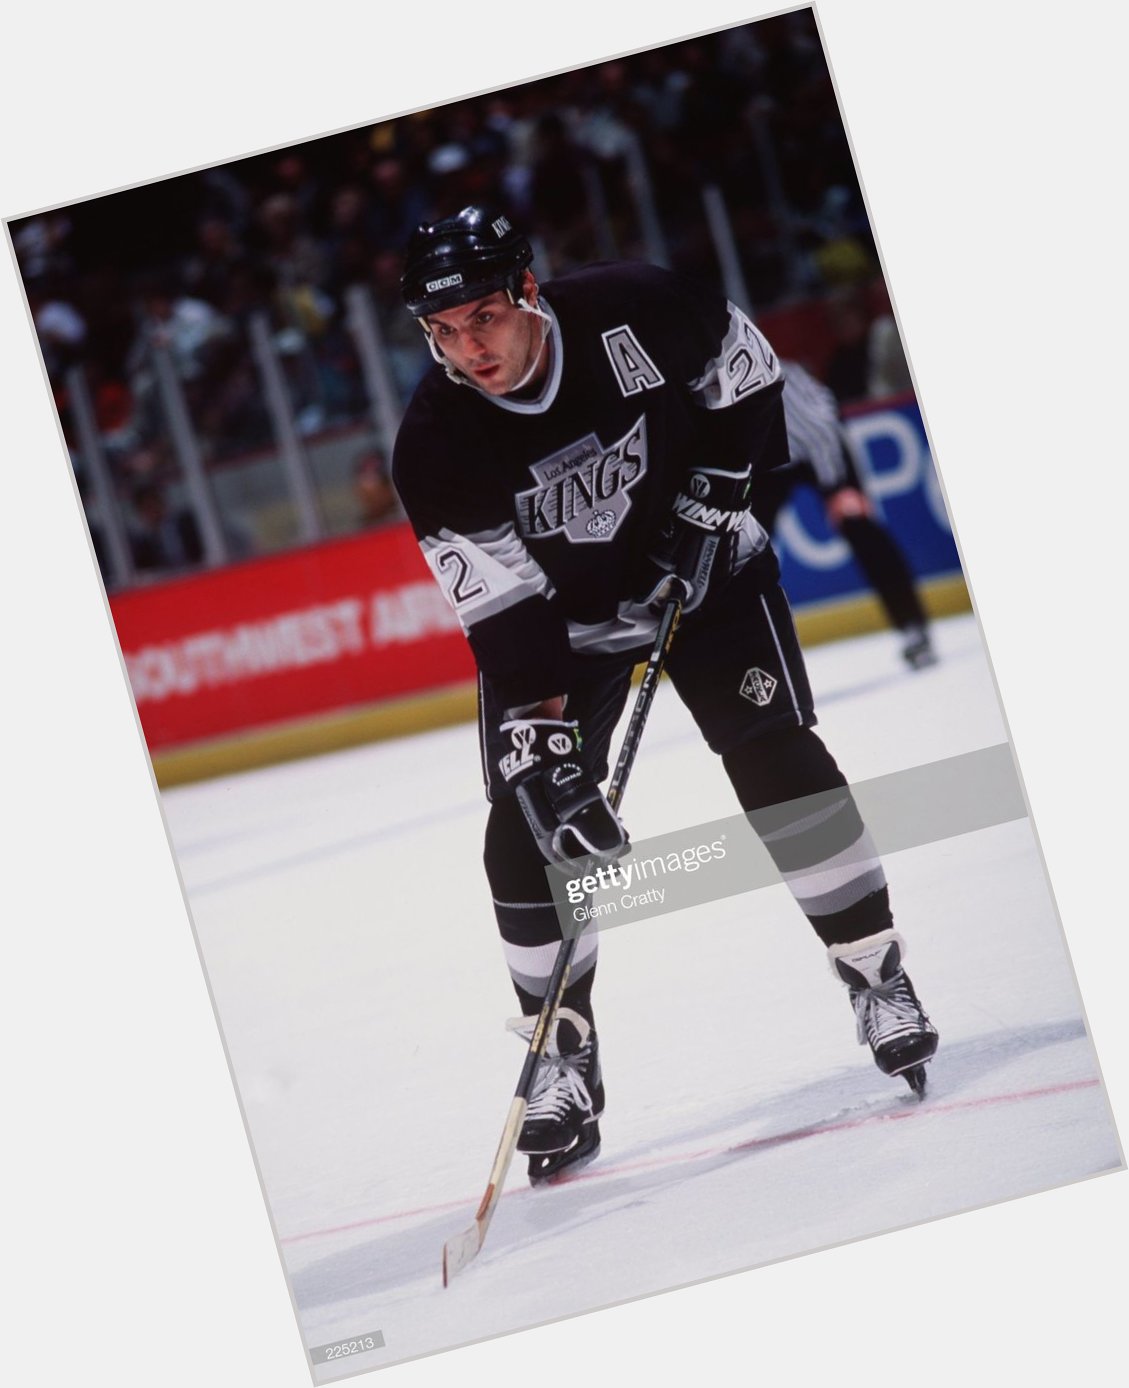 Happy birthday to former forward Rick Tocchet, who was born on April 9, 1964.  